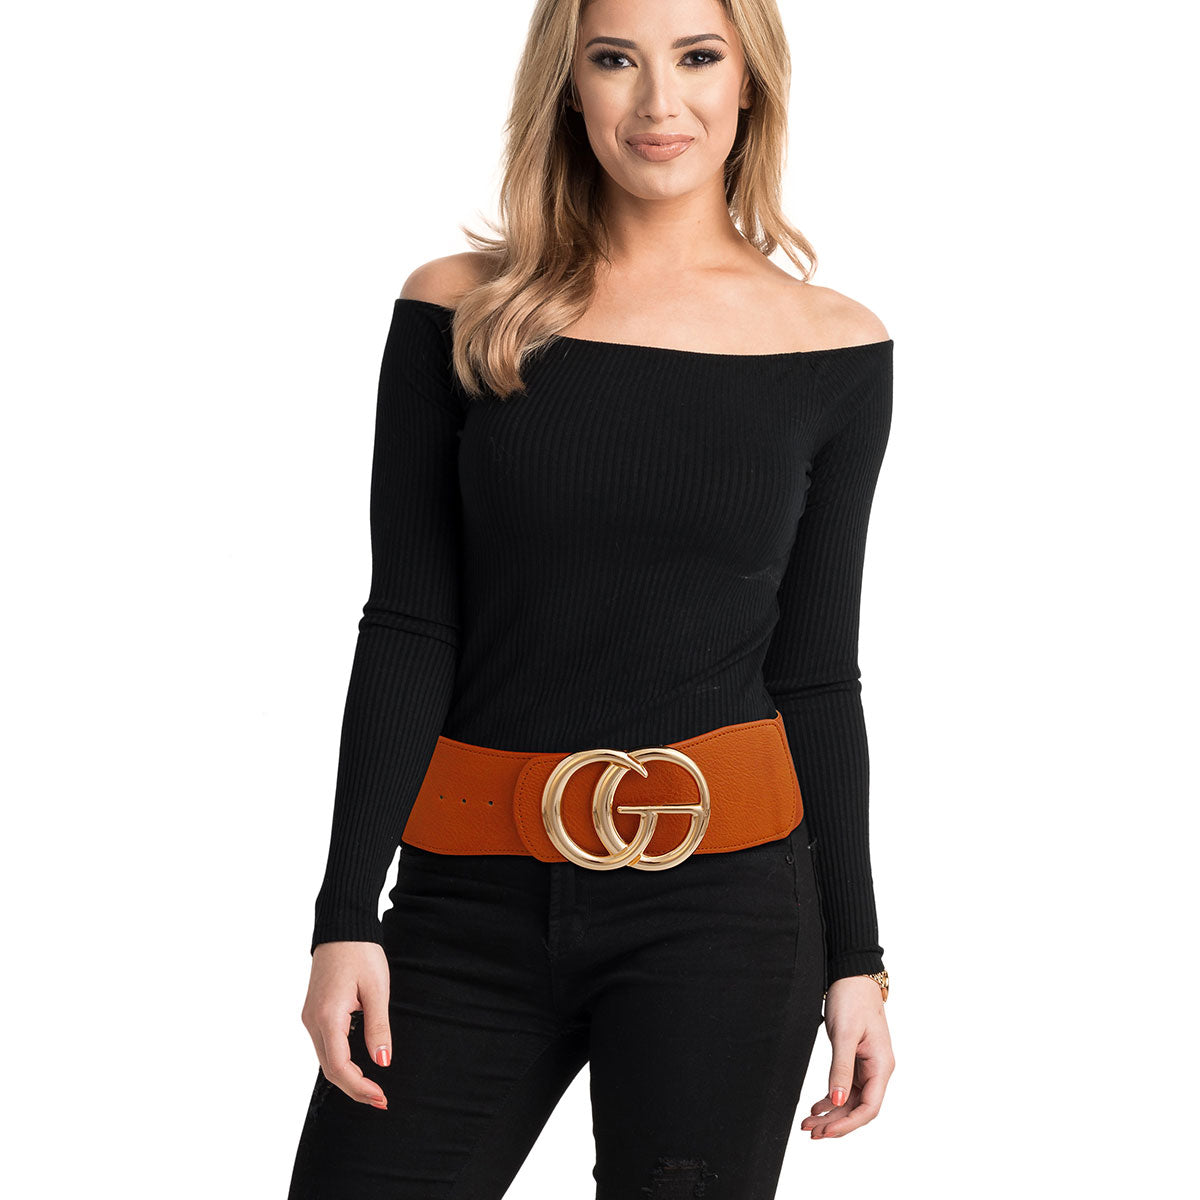 Camel and Gold GG Wide Stretch Belt